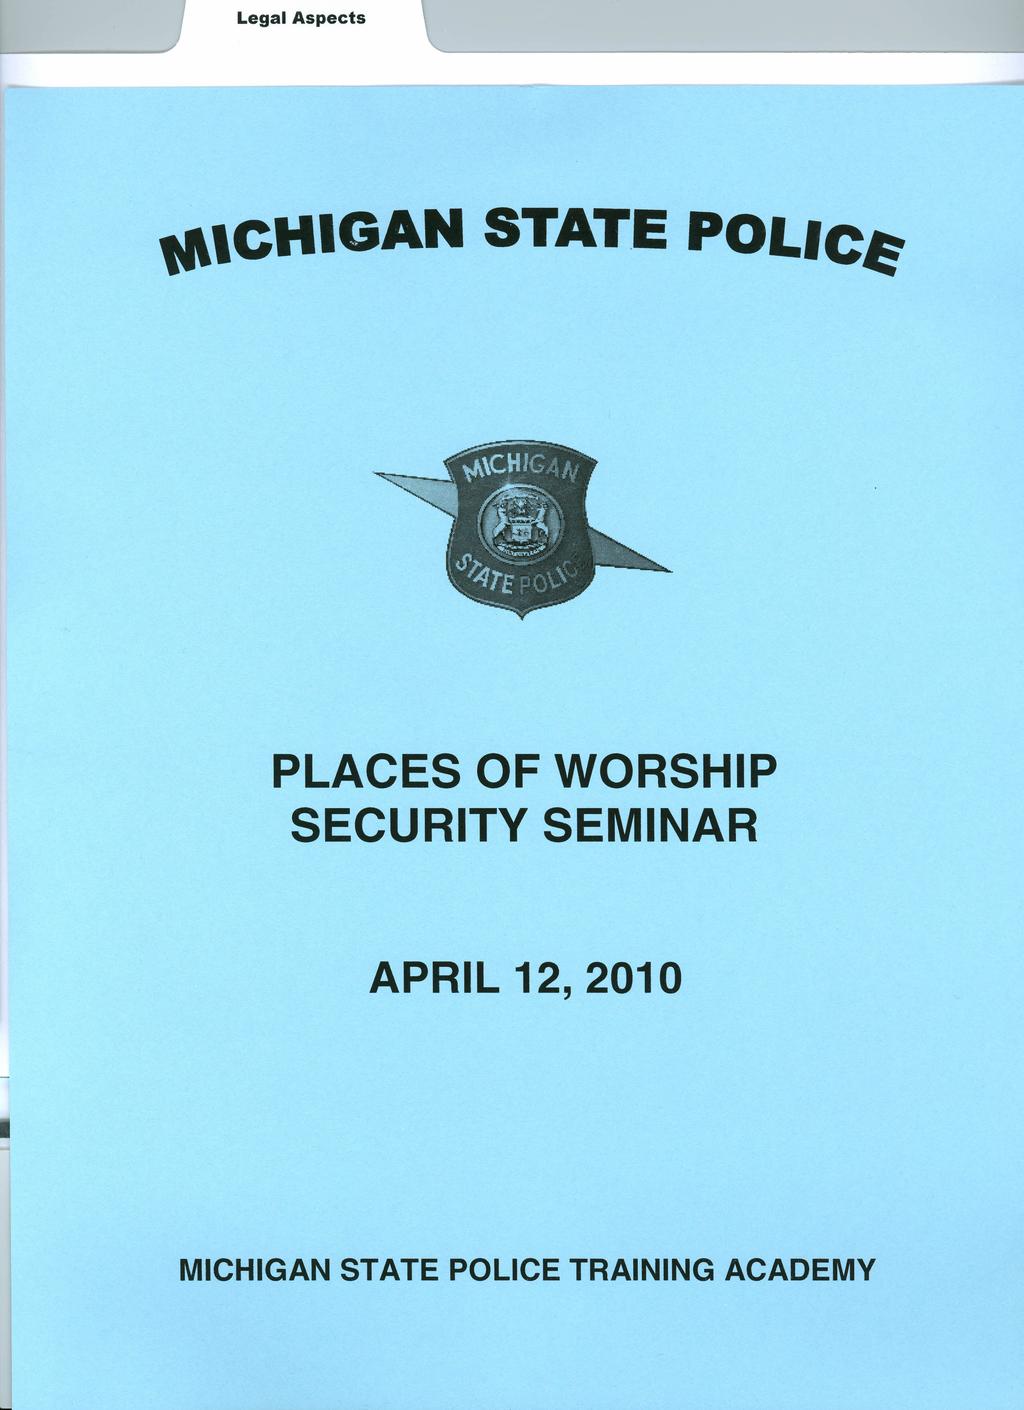 Legal Aspects ta,chigan STATE POLICe" PLACES OF WORSHIP